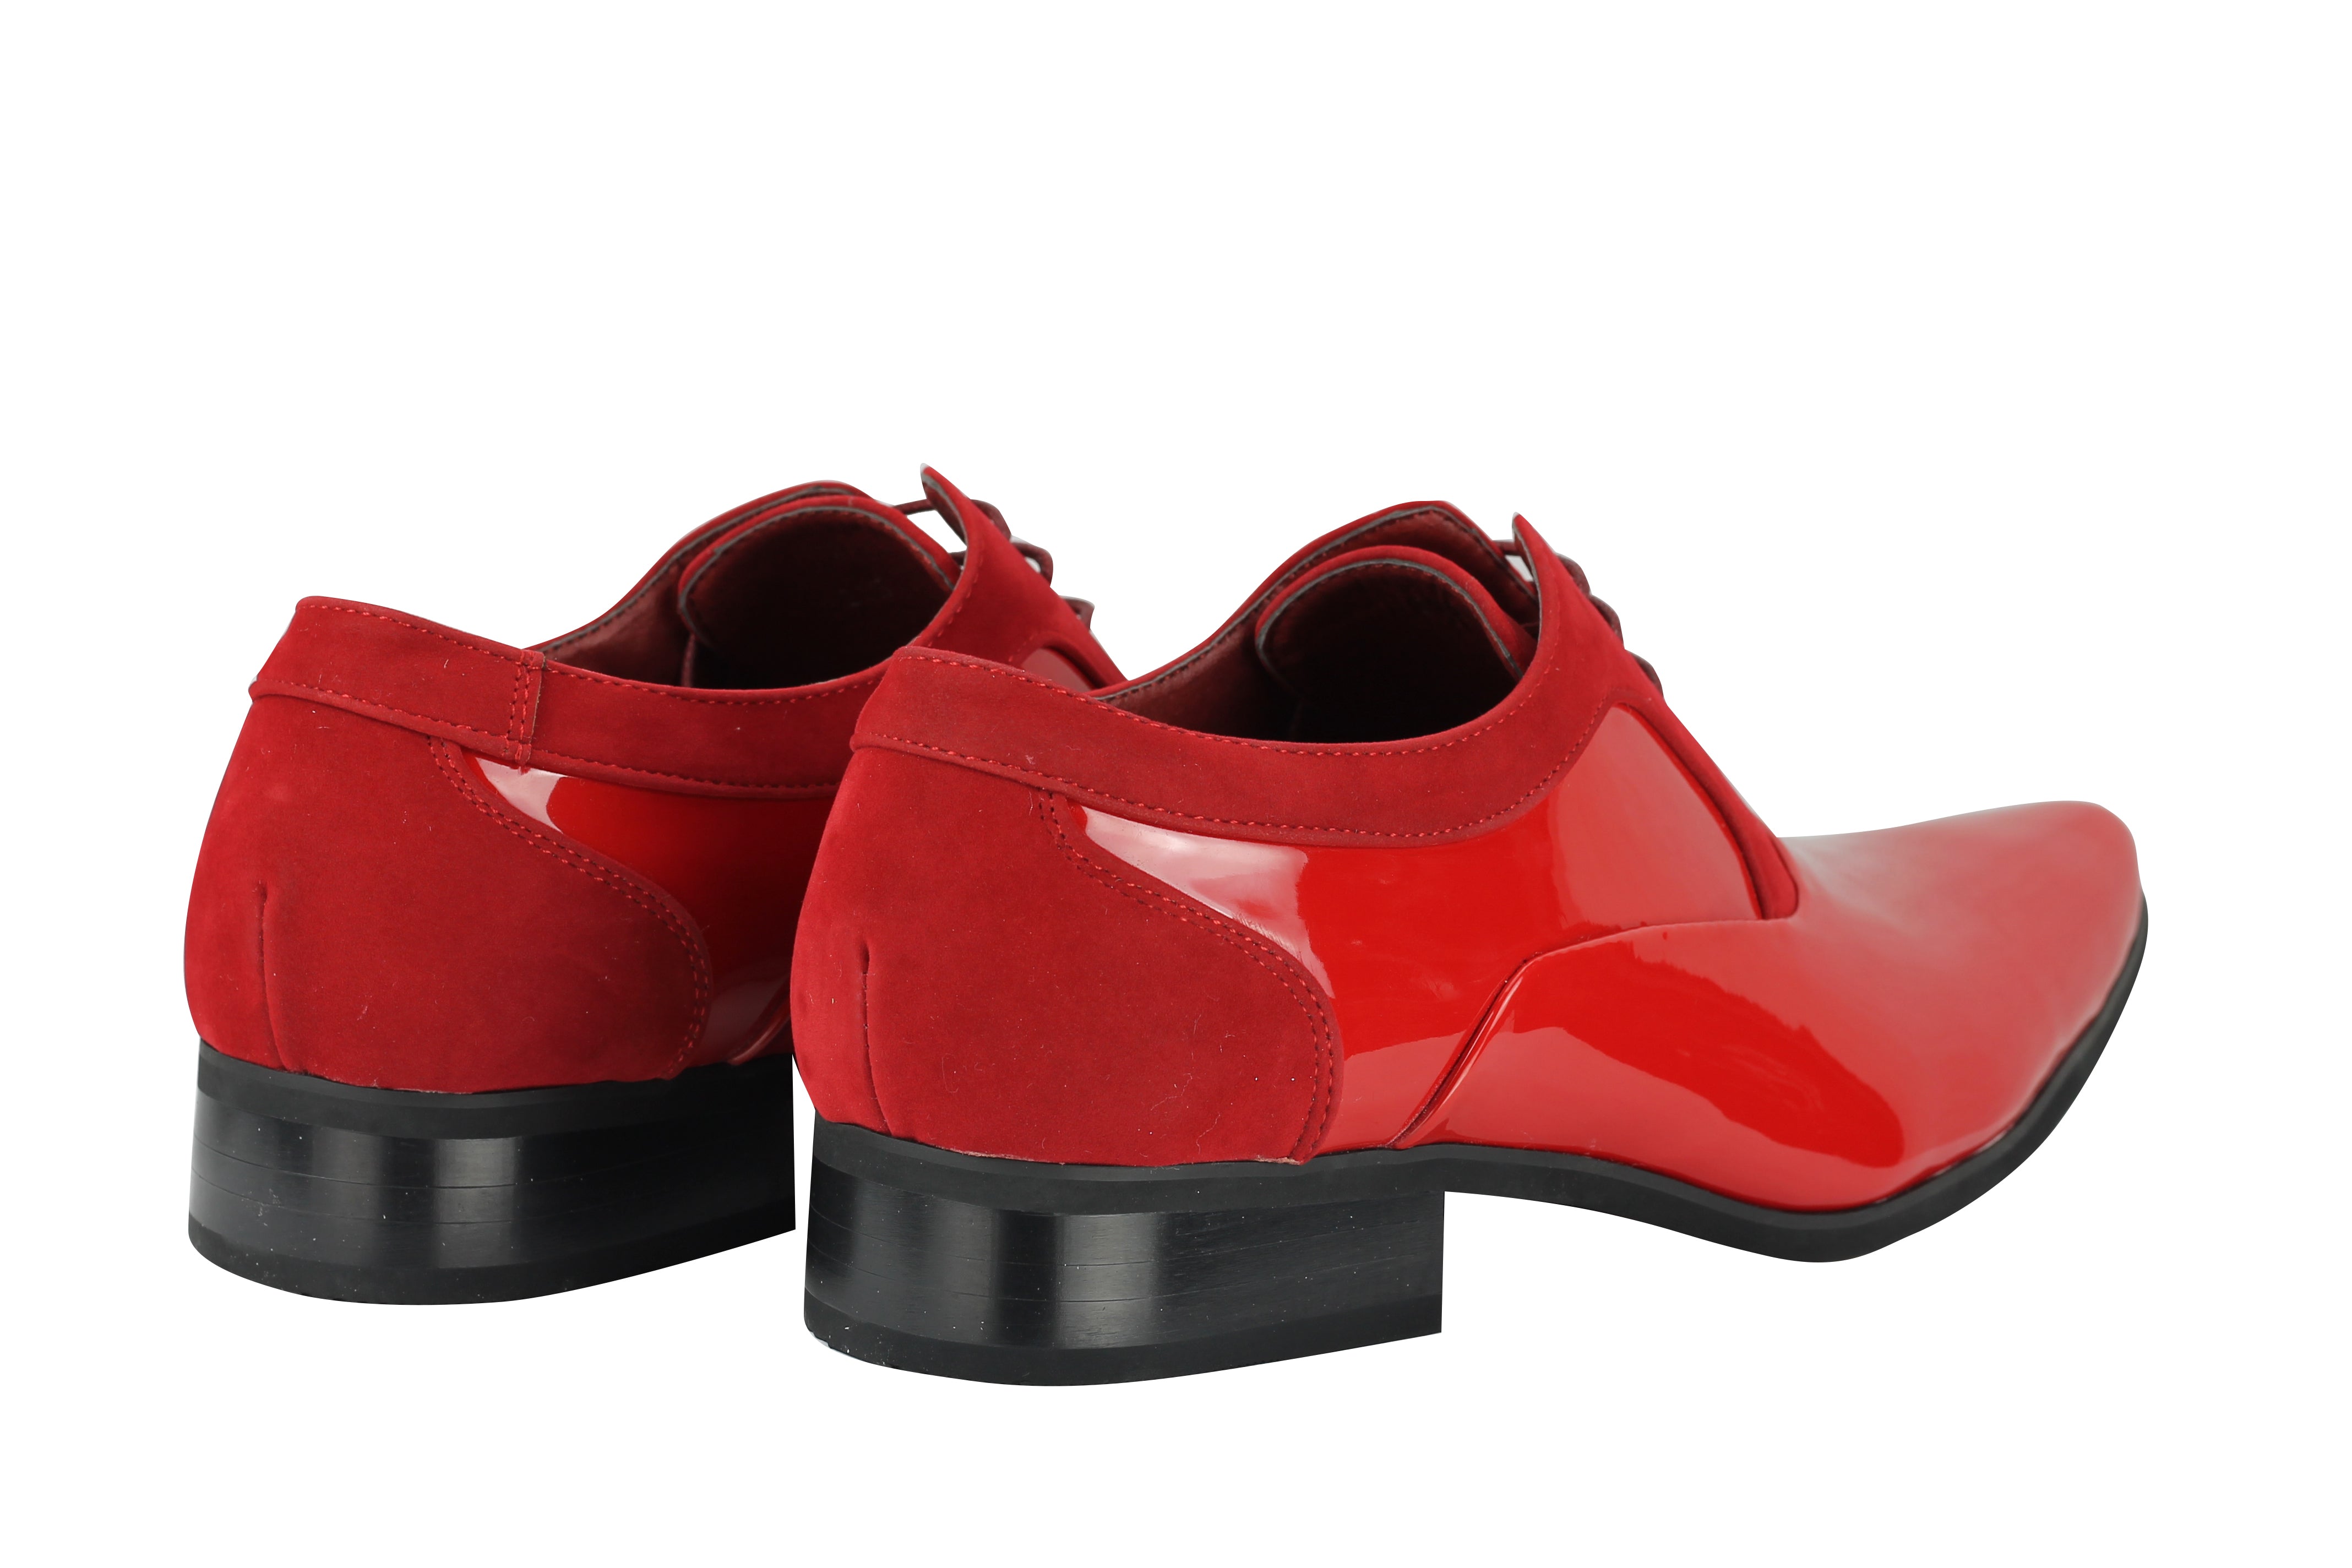 Shiny Patent Leather Formal Lace Up Shoes In Red